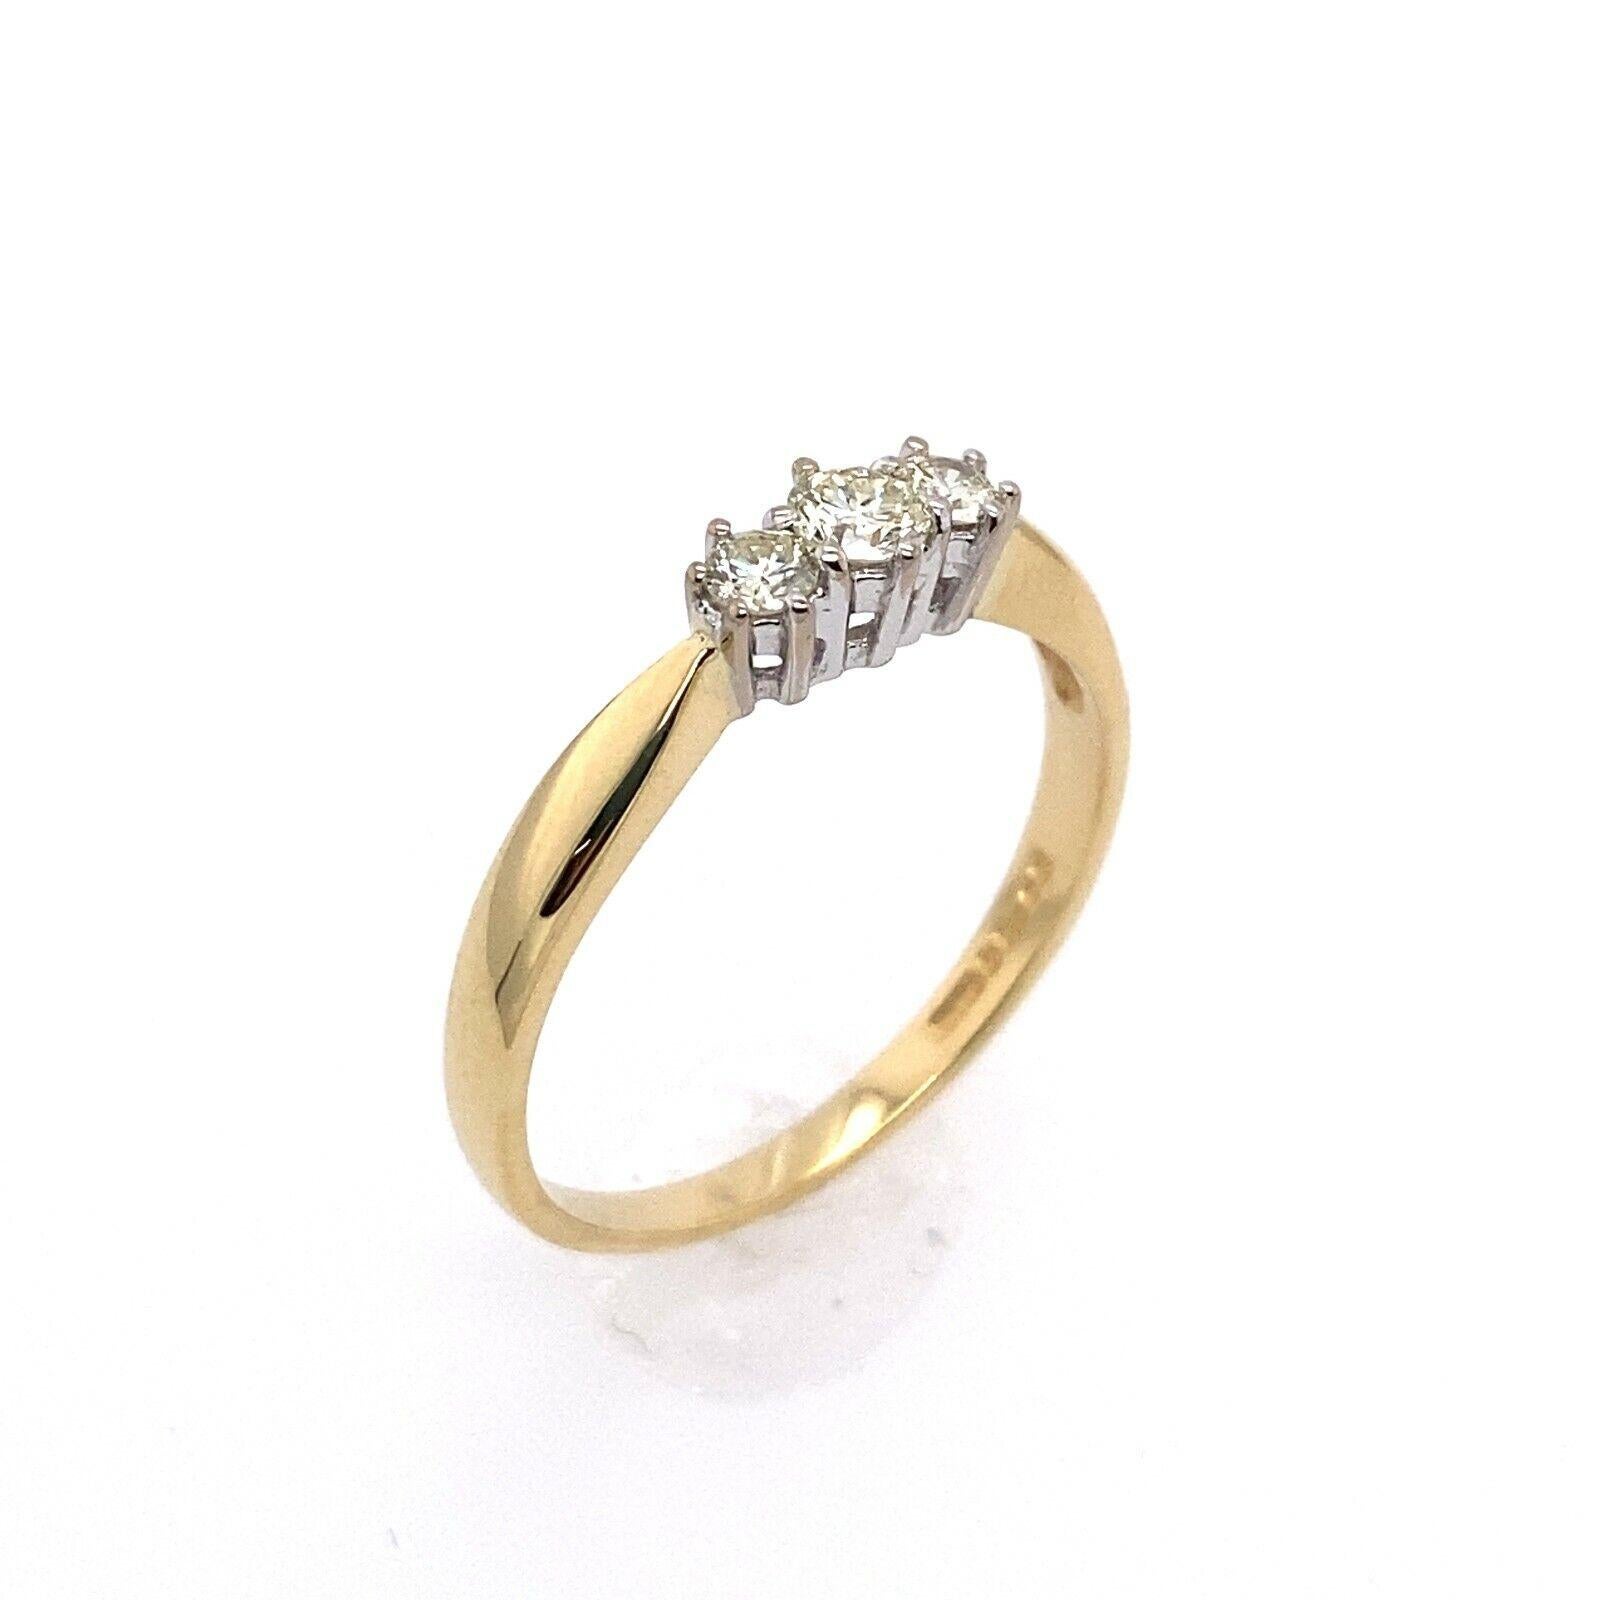 Classic 18ct Yellow& White Gold Trilogy Ring, Set With 0.25ct Of Diamonds

Additional Information: 
Total Diamond Weight: 0.25ct
Diamond Colour: G/H
Diamond Clarity: SI
Width of Band : 1.80mm
Width of Head: 3.80mm
Length of Head: 8.75mm
Total